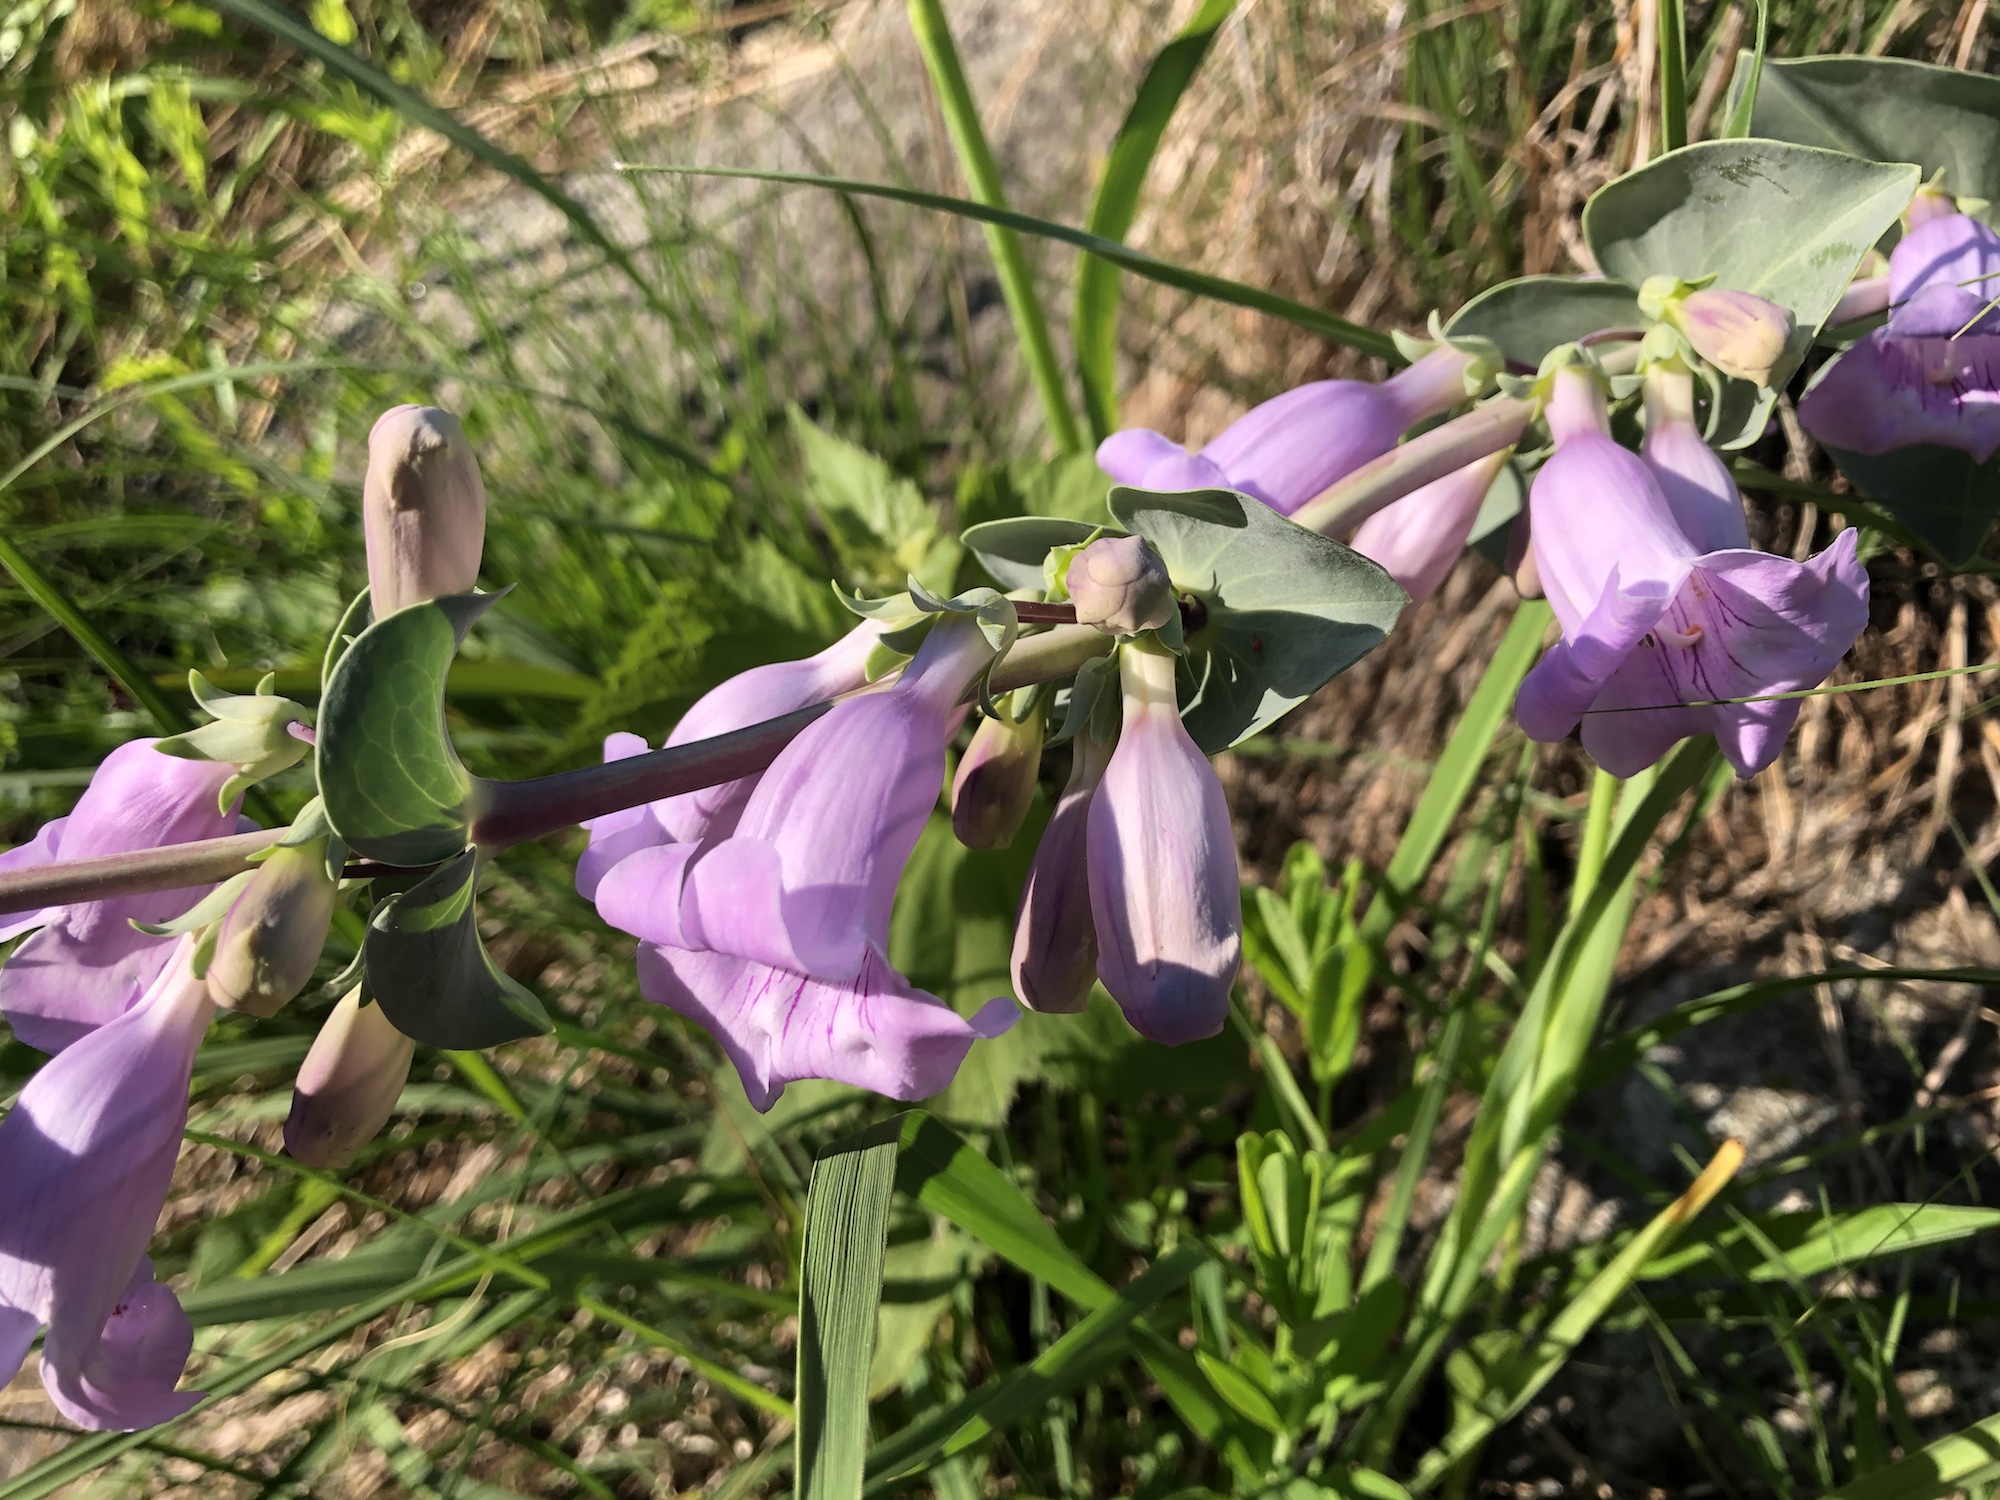 Large Beardtongue in the UW-Madison Arboretum in Madison, Wisconsin on May 26, 2021.